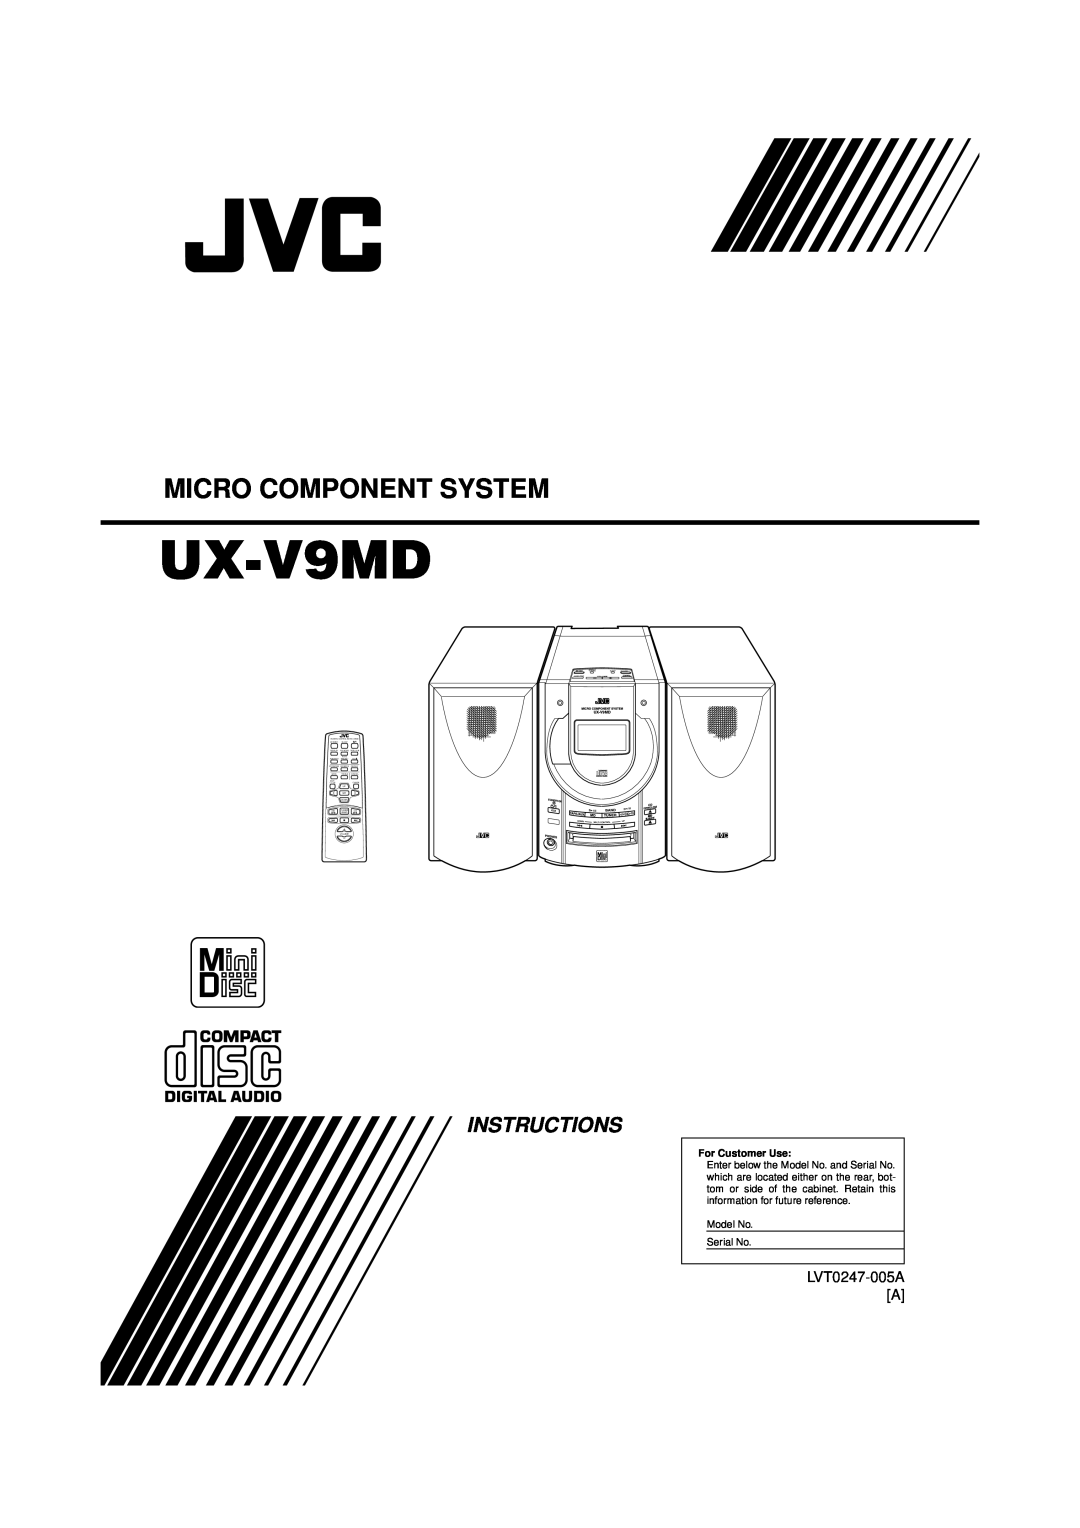 JVC UX-V9MD manual Micro Component System, Instructions, LVT0247-005A A, For Customer Use 